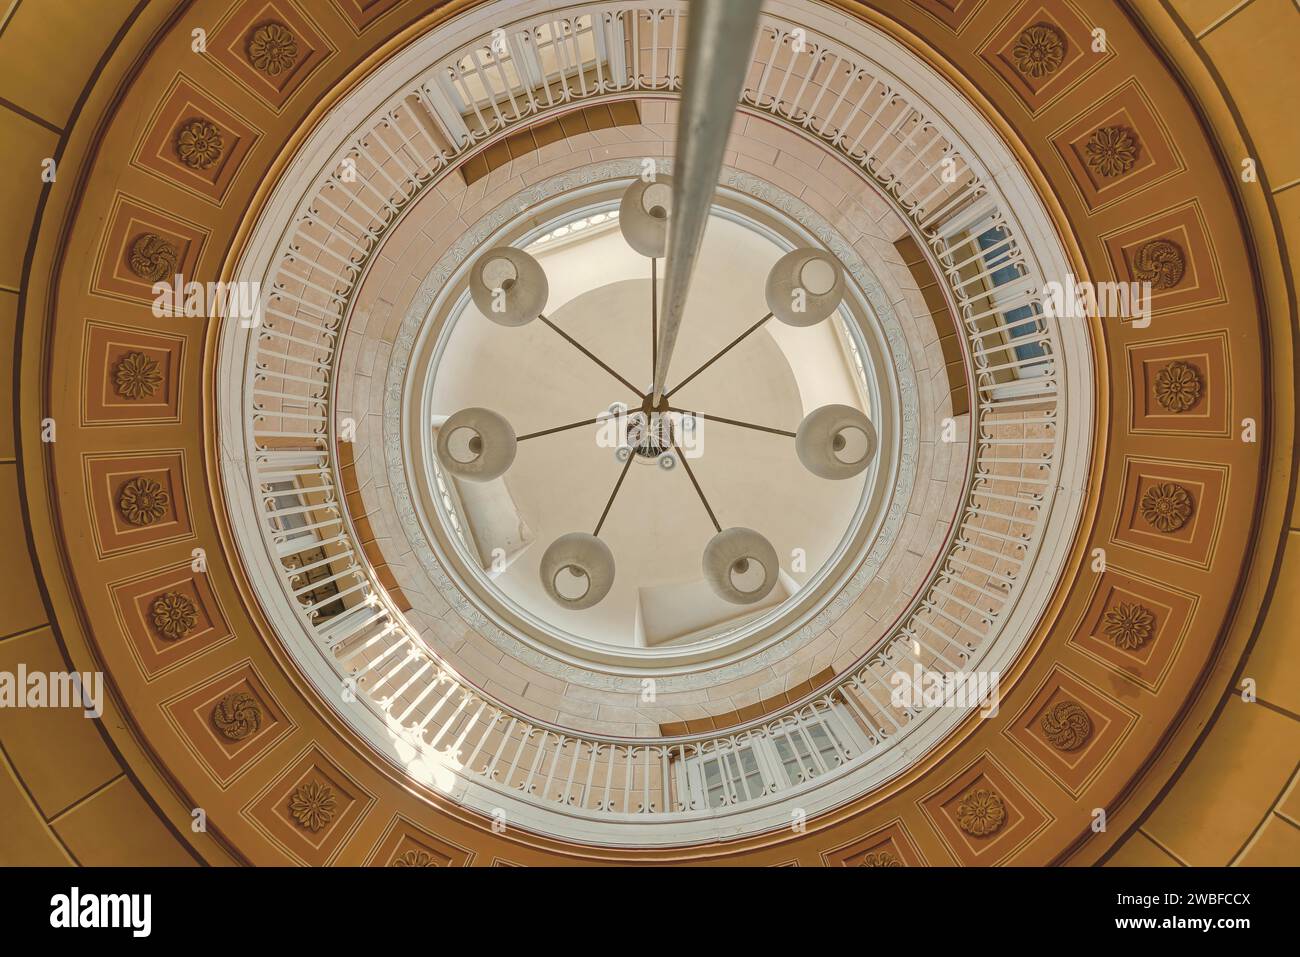 Underside of a large ceiling dome with fine geometric patterns and central lighting, Schachtrupp Villa, Lost Place, Osterode am Harz, Lower Saxony Stock Photo